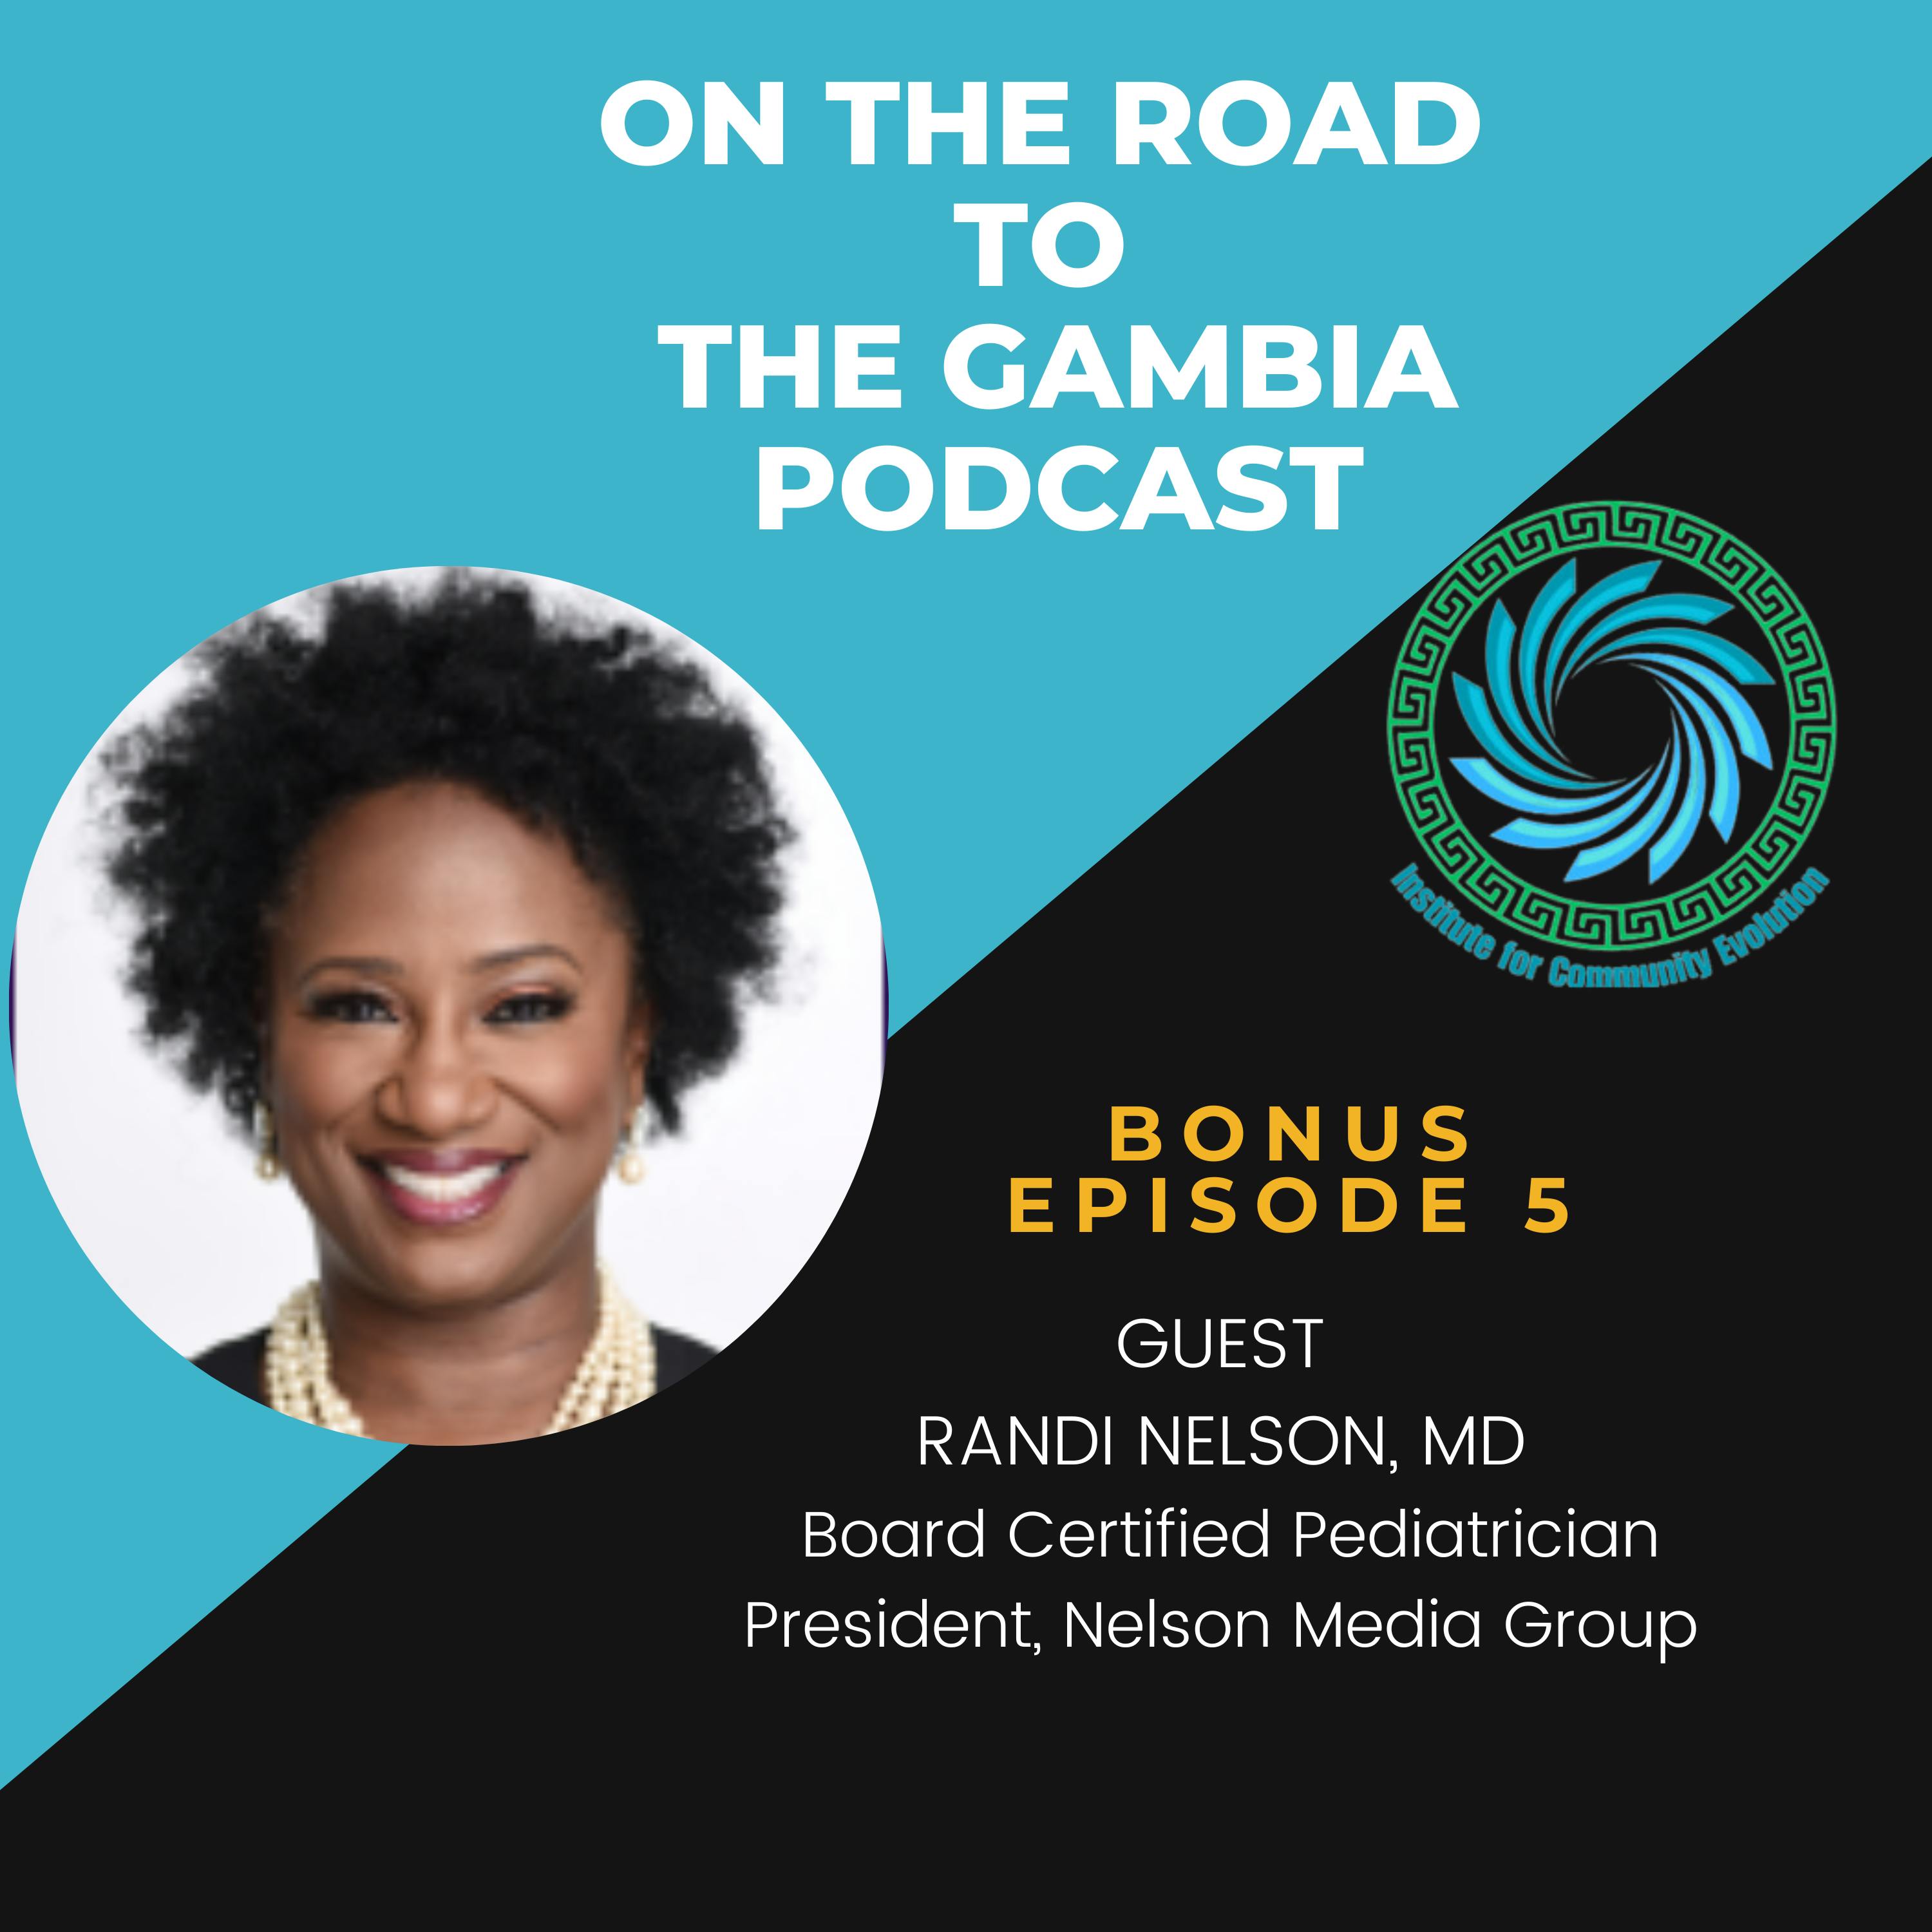 A Pediatrician’s Journey Towards Preventive Health in The Gambia with Dr. Randi Nelson